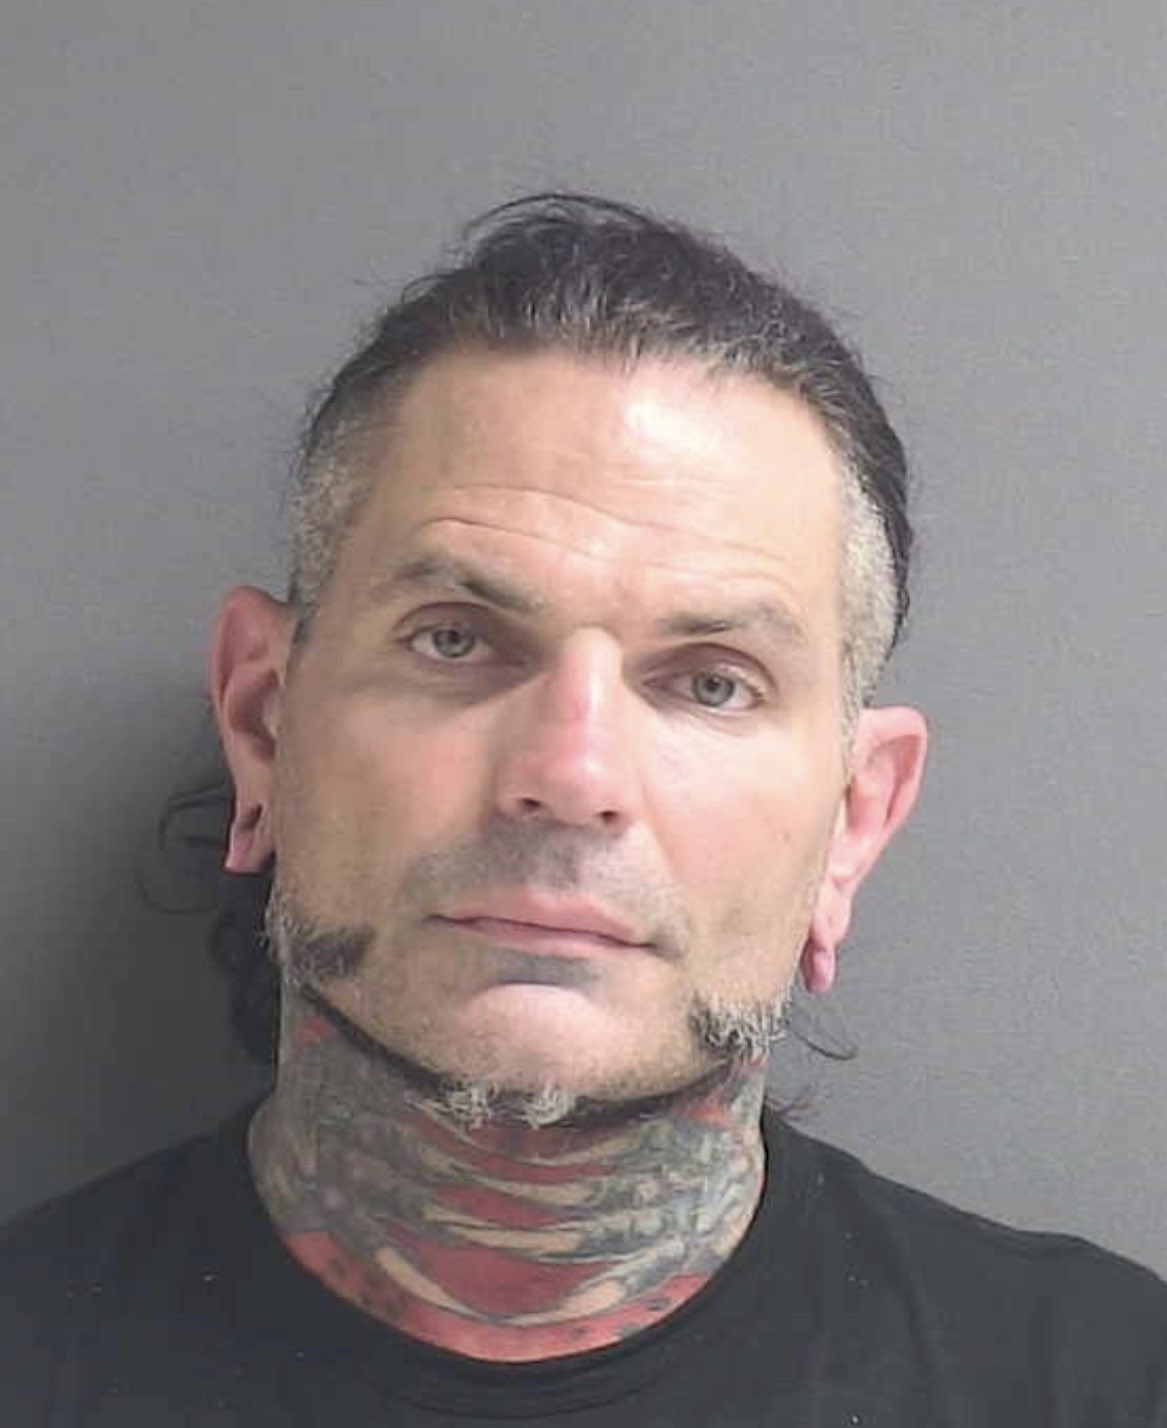 Jeff Hardy Arrested - Charged With DUI